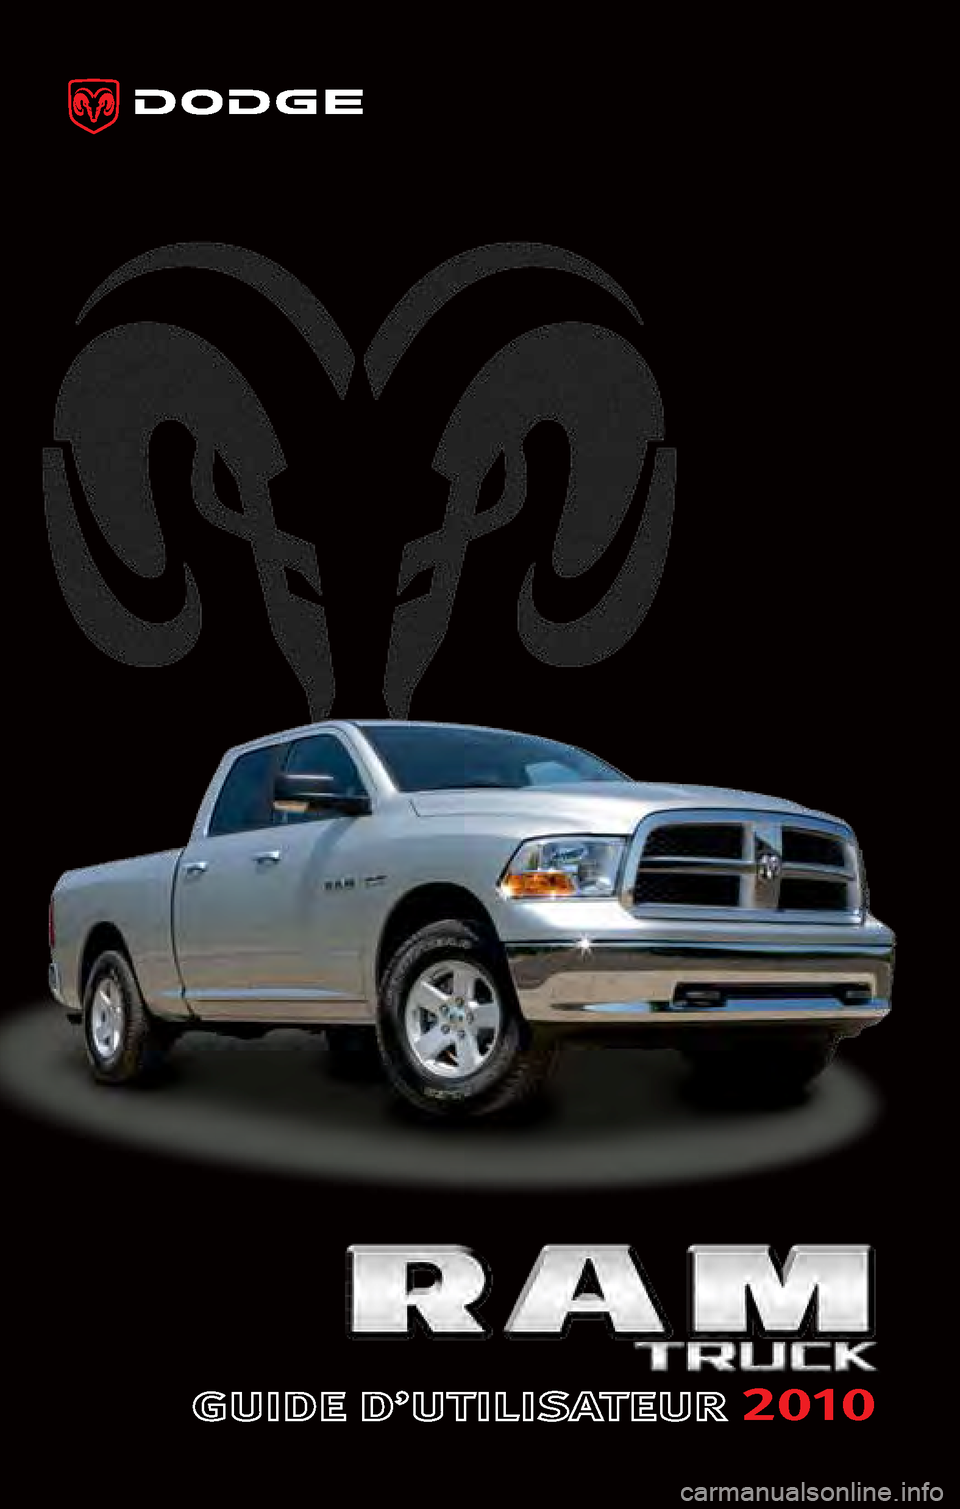 Ram 1500 2010  Guide dutilisateur (in French) 